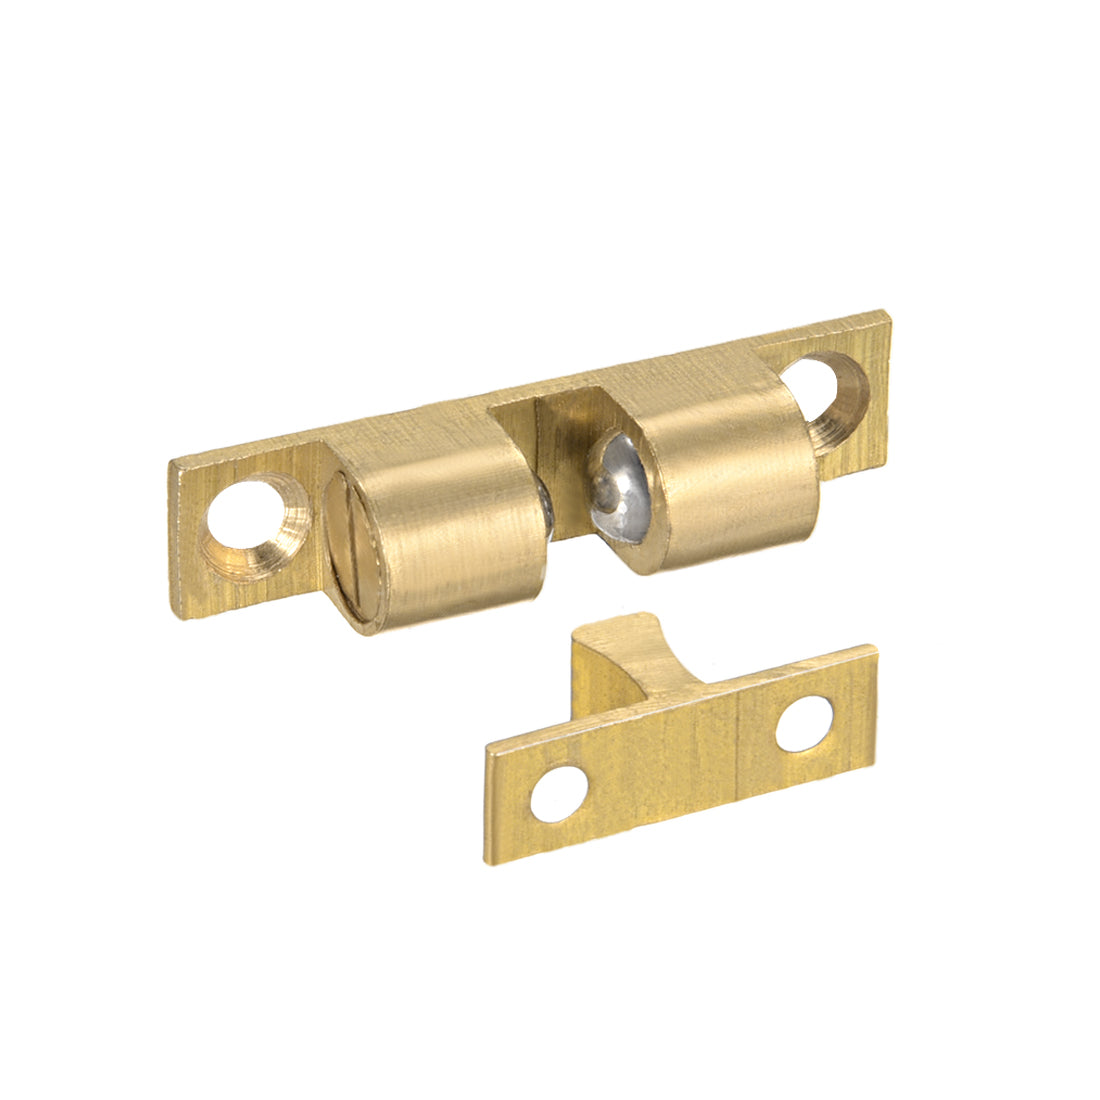 uxcell Uxcell Cabinet Door Closet Brass Double Ball Catch Tension Latch 35mm Length Gold Tone 2pcs